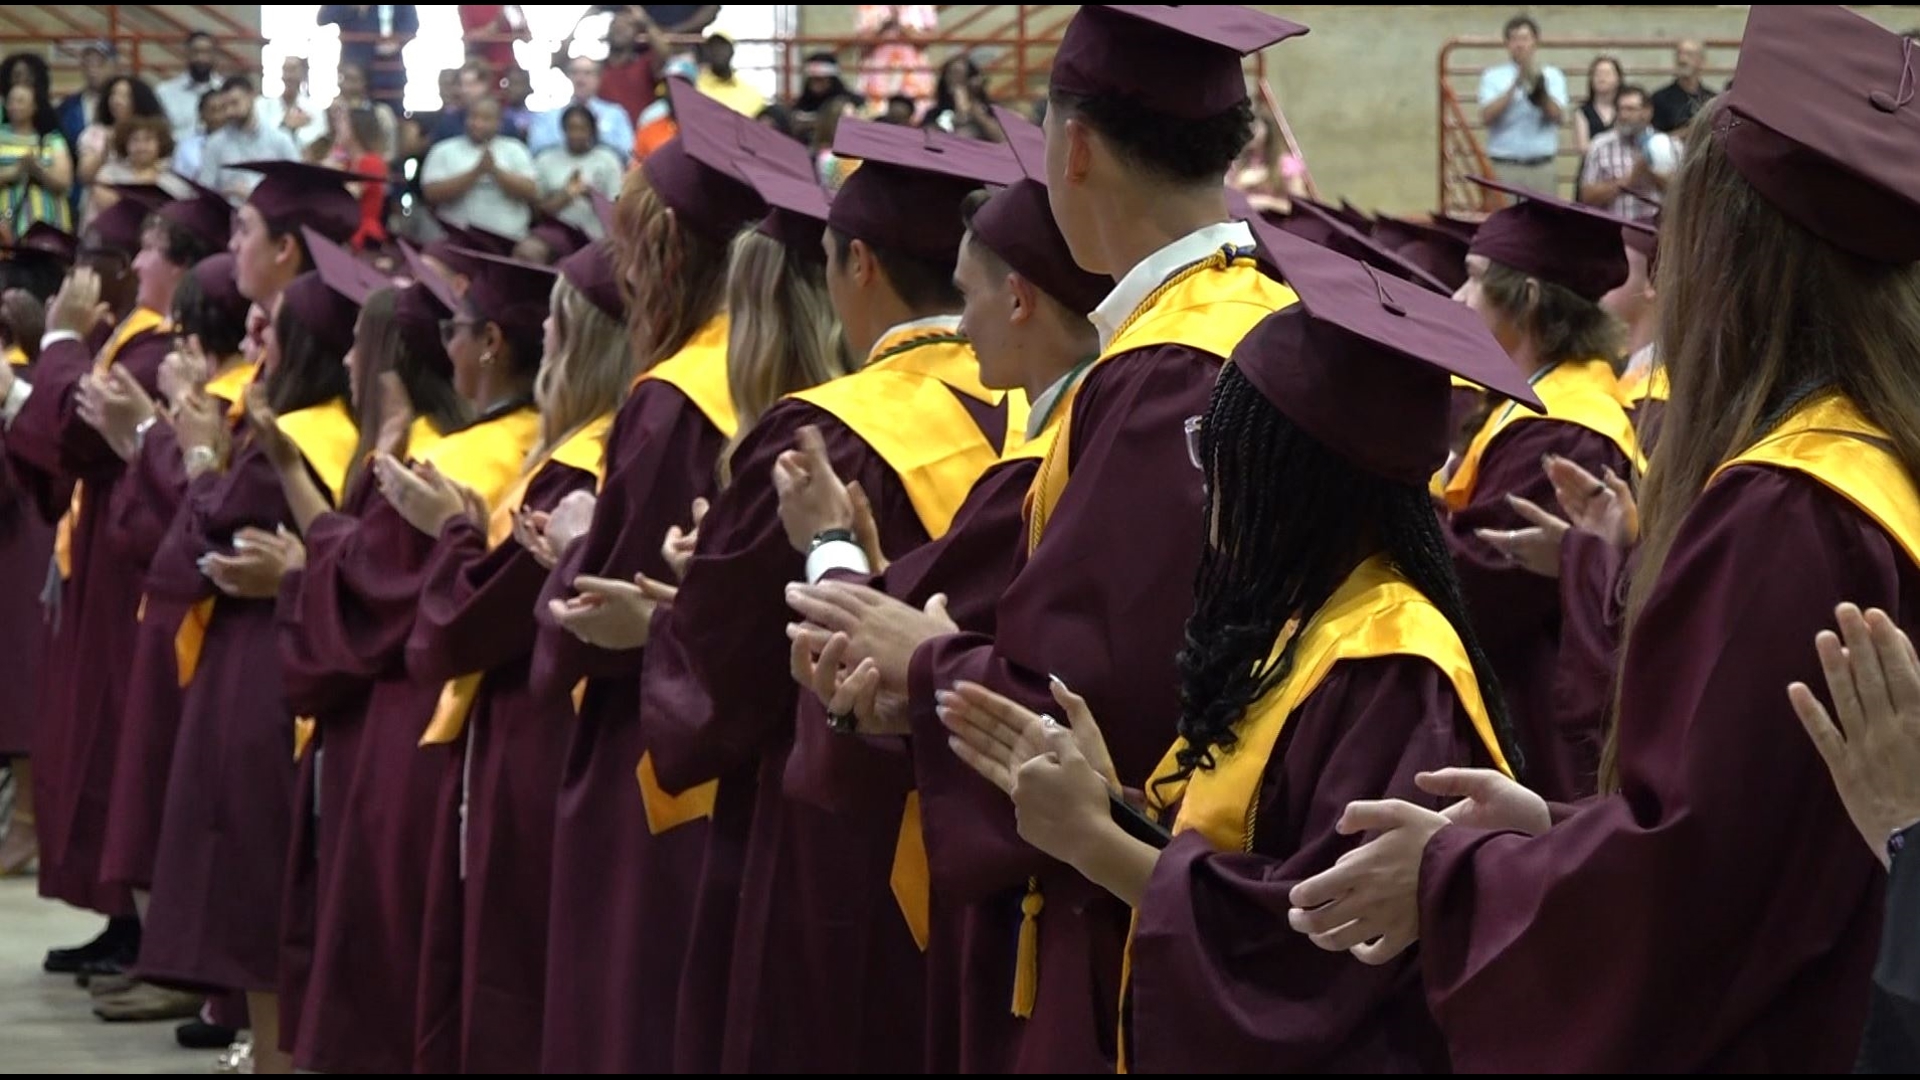 Families watched excitedly as over 354 graduates received their diplomas.